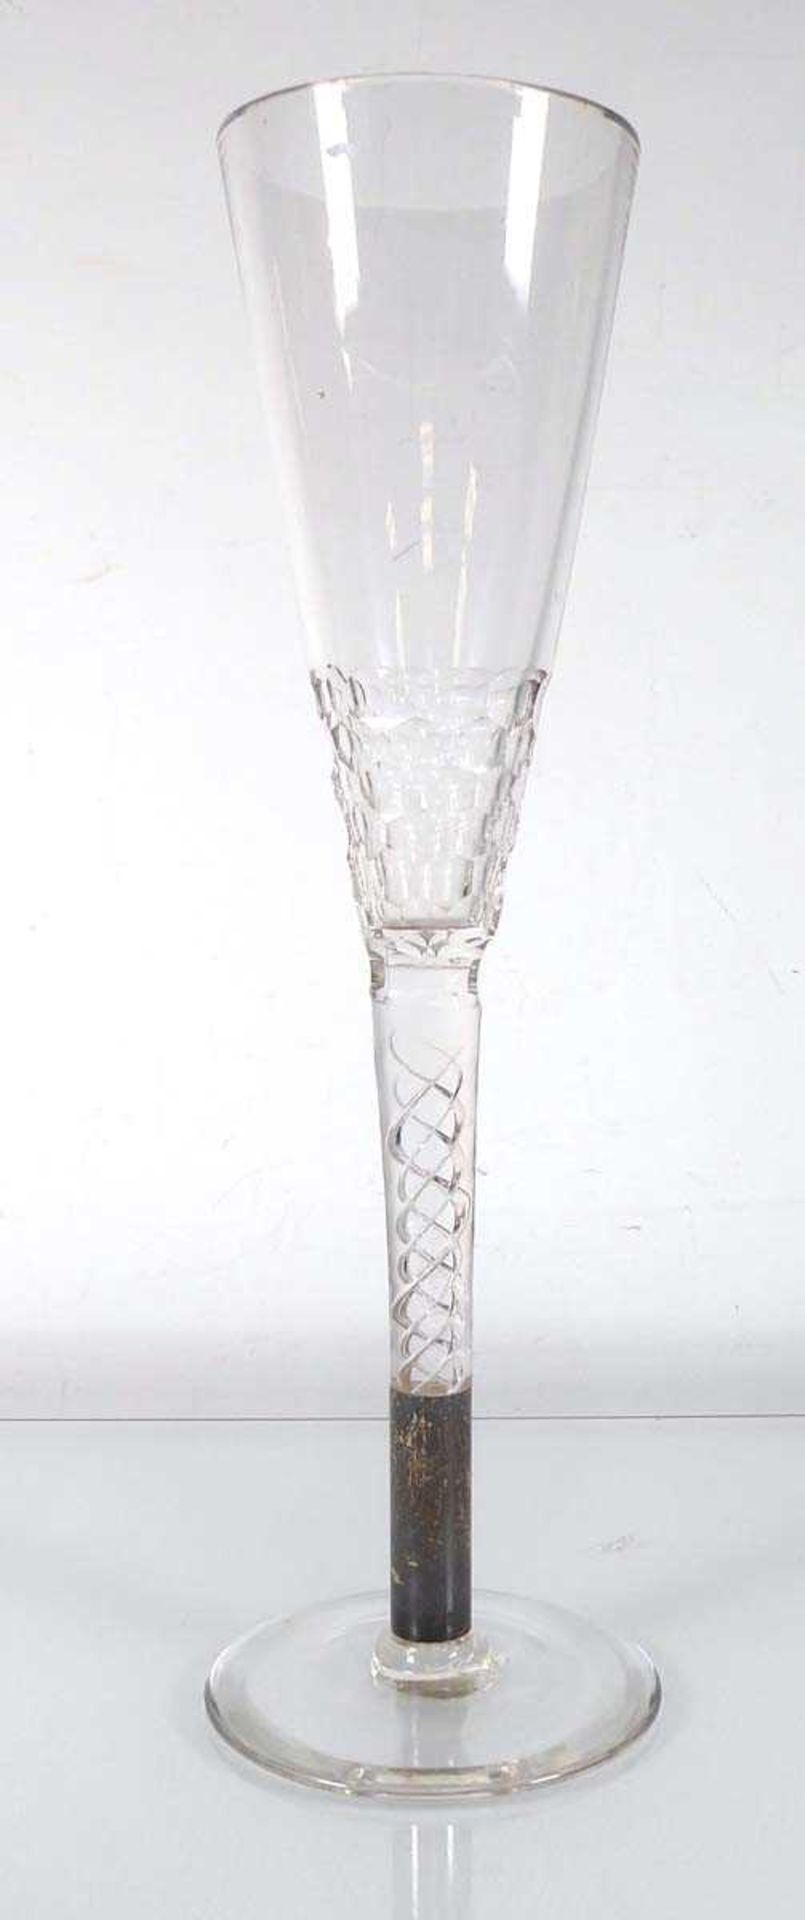 An air twist stem drinking glass of oversized proportions, h. 40.5 cm - Image 2 of 2